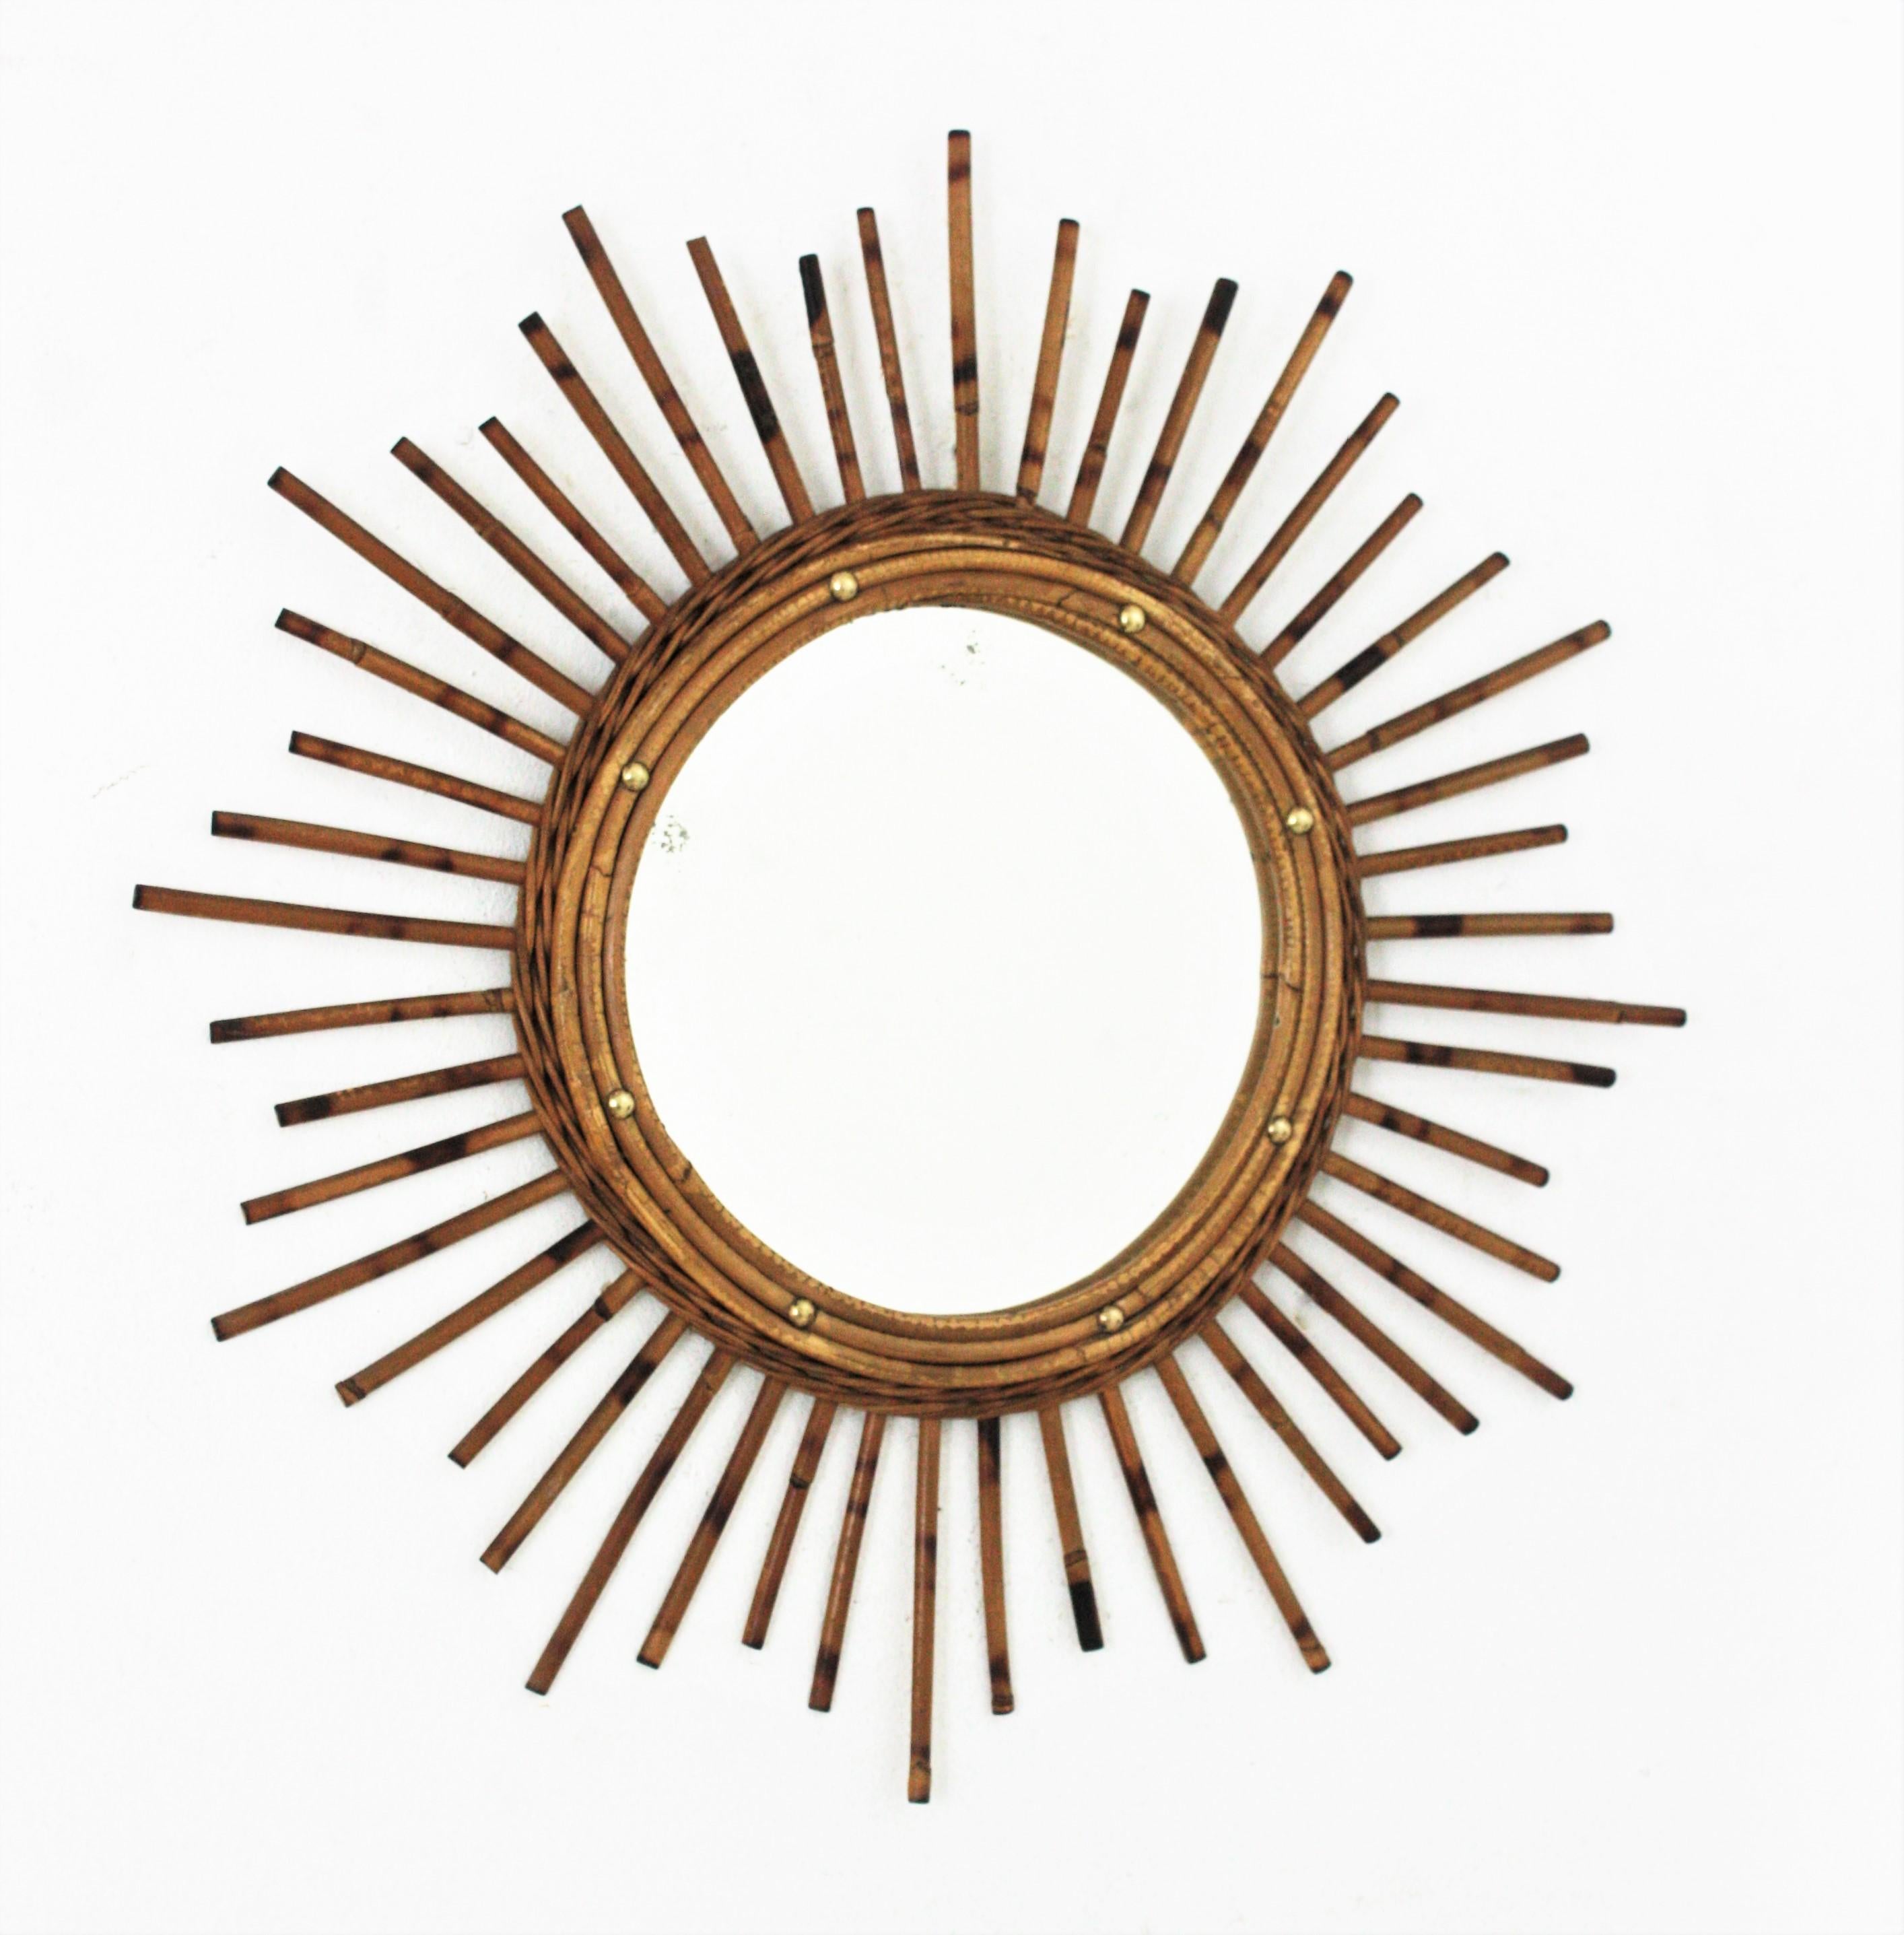 French Riviera Sunburst Starburst Mirror in Rattan, 1960s
Handcrafted starburst sunburst mirror with rattan frame and brass studs.
This eye-catching mediterranean sunburst mirror was handcrafted in France at the sixties and It has all the taste of